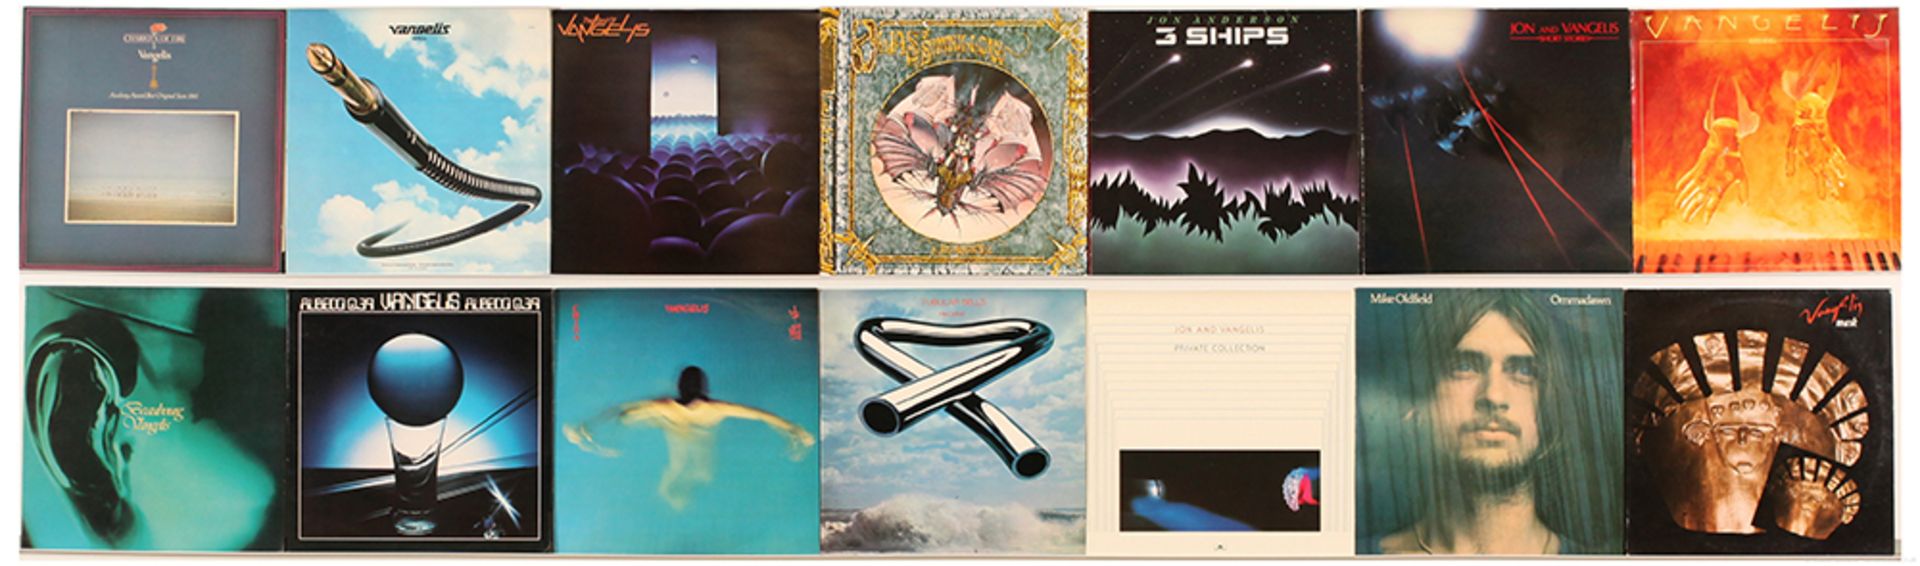 GRP inc Vangelis and related LPs titles